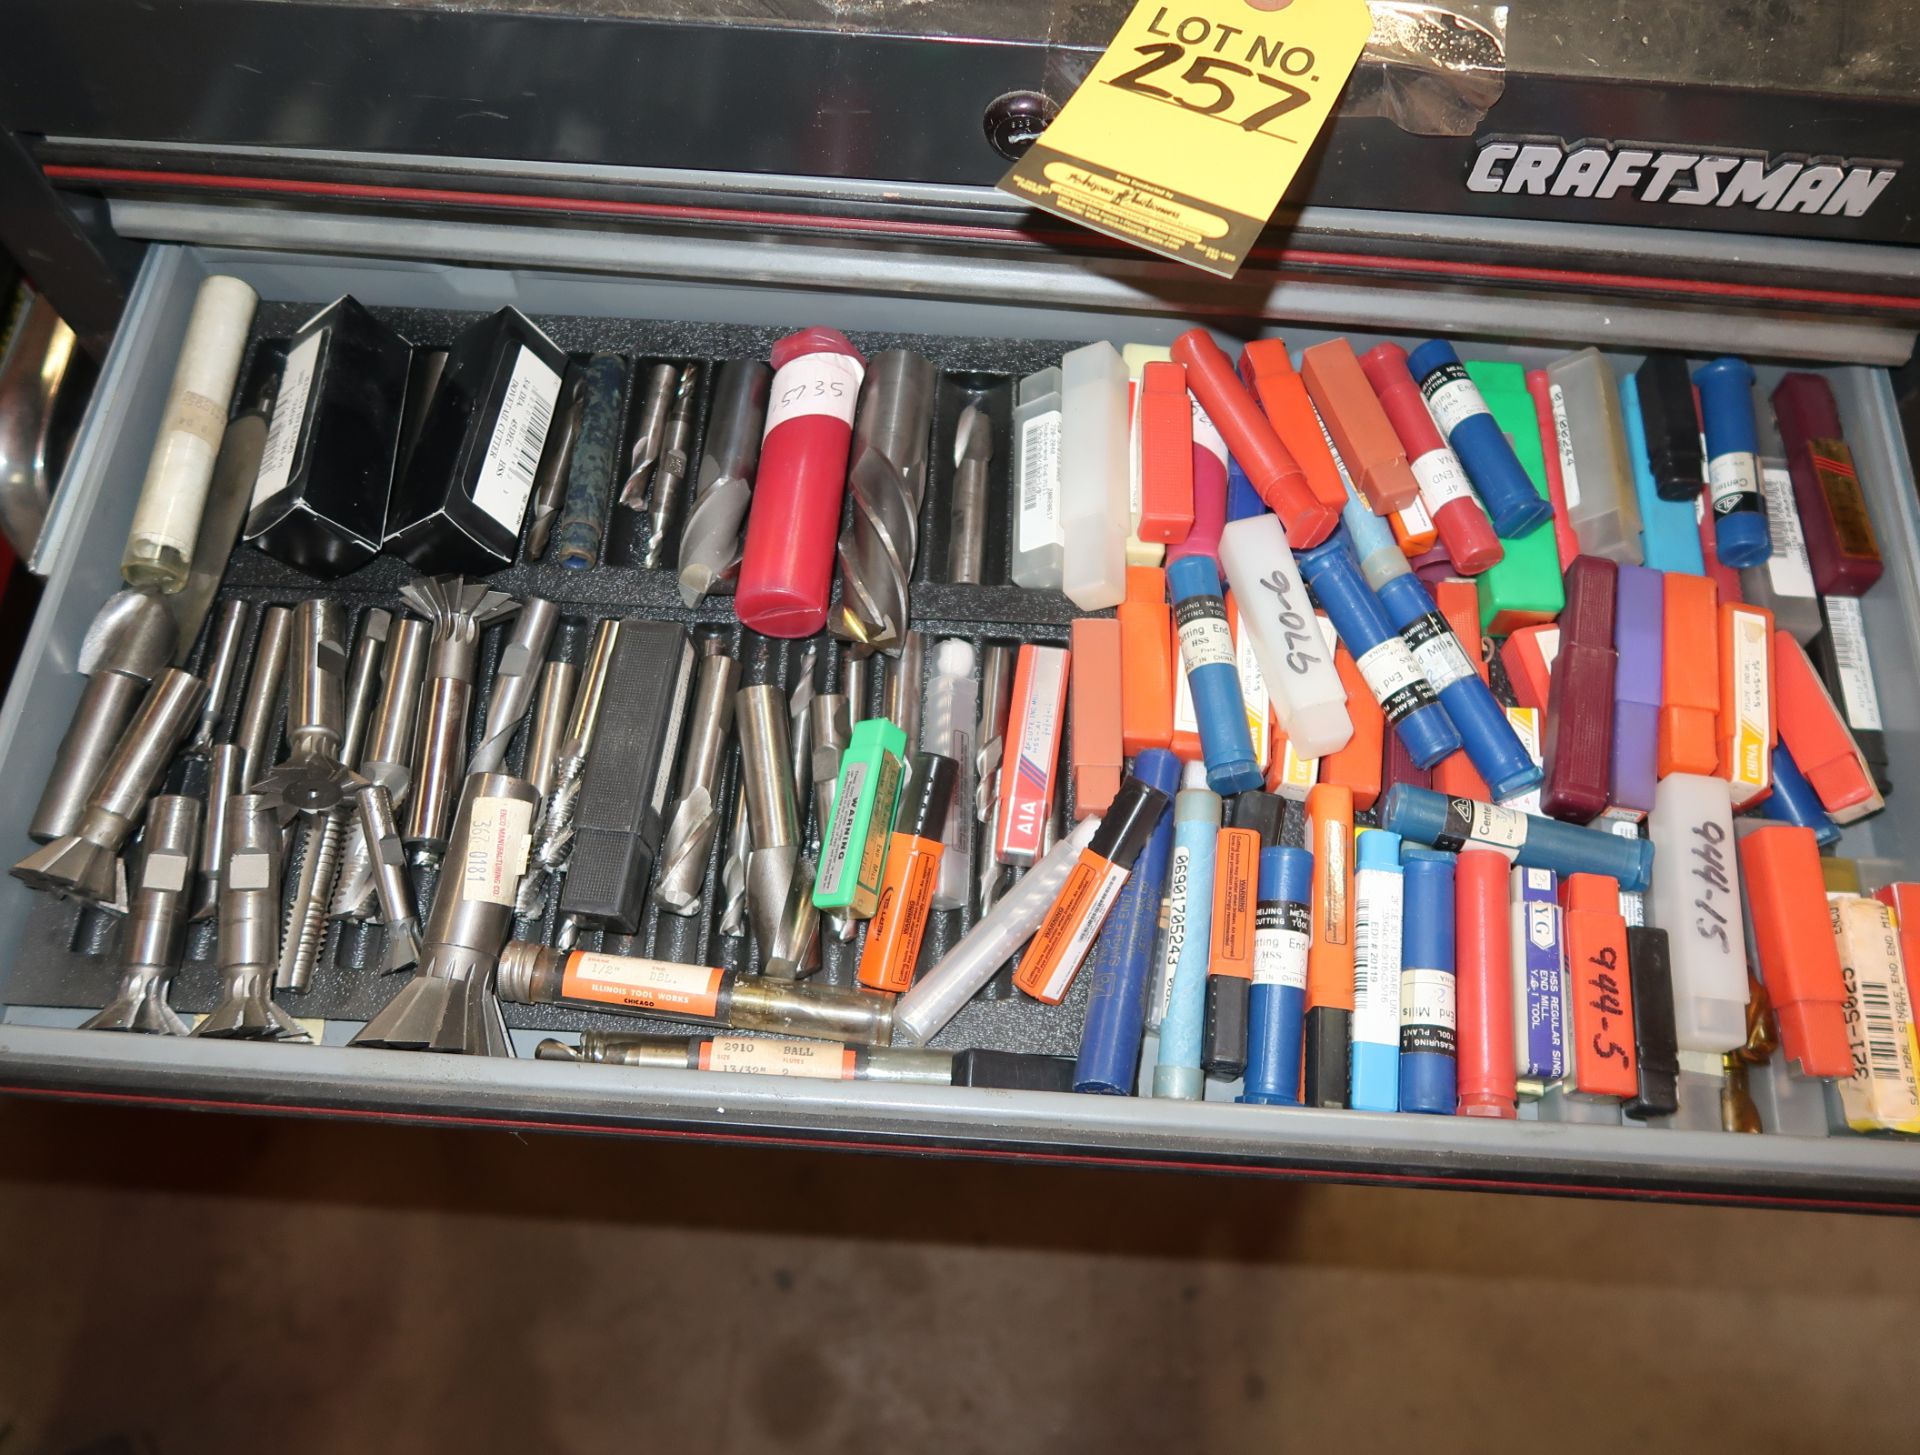 CRAFTSMAN TOOL BOX W/ CASTERS, ASST DRILL BITS, ETC - Image 5 of 5